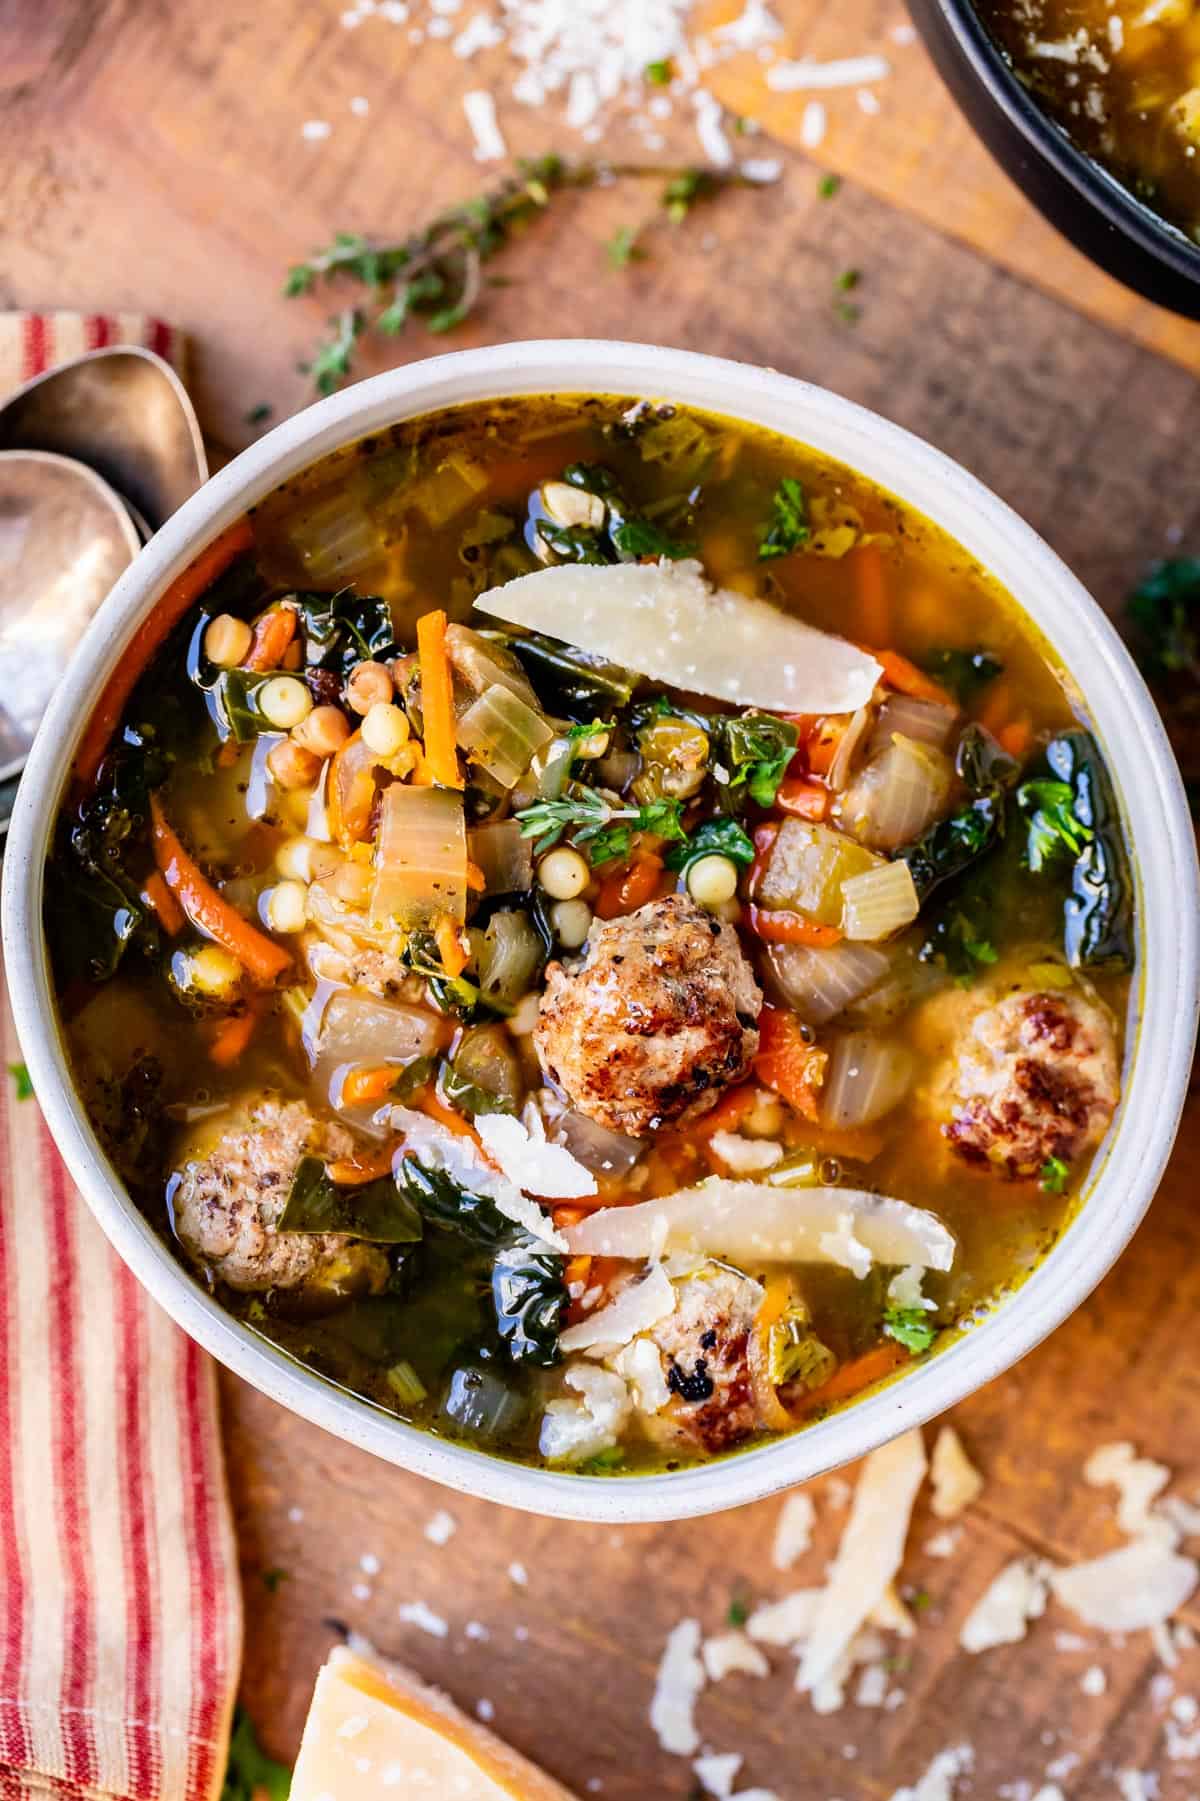 Italian Wedding Soup made of broth, meatballs, greens, and pasta in a white bowl on a cutting board.